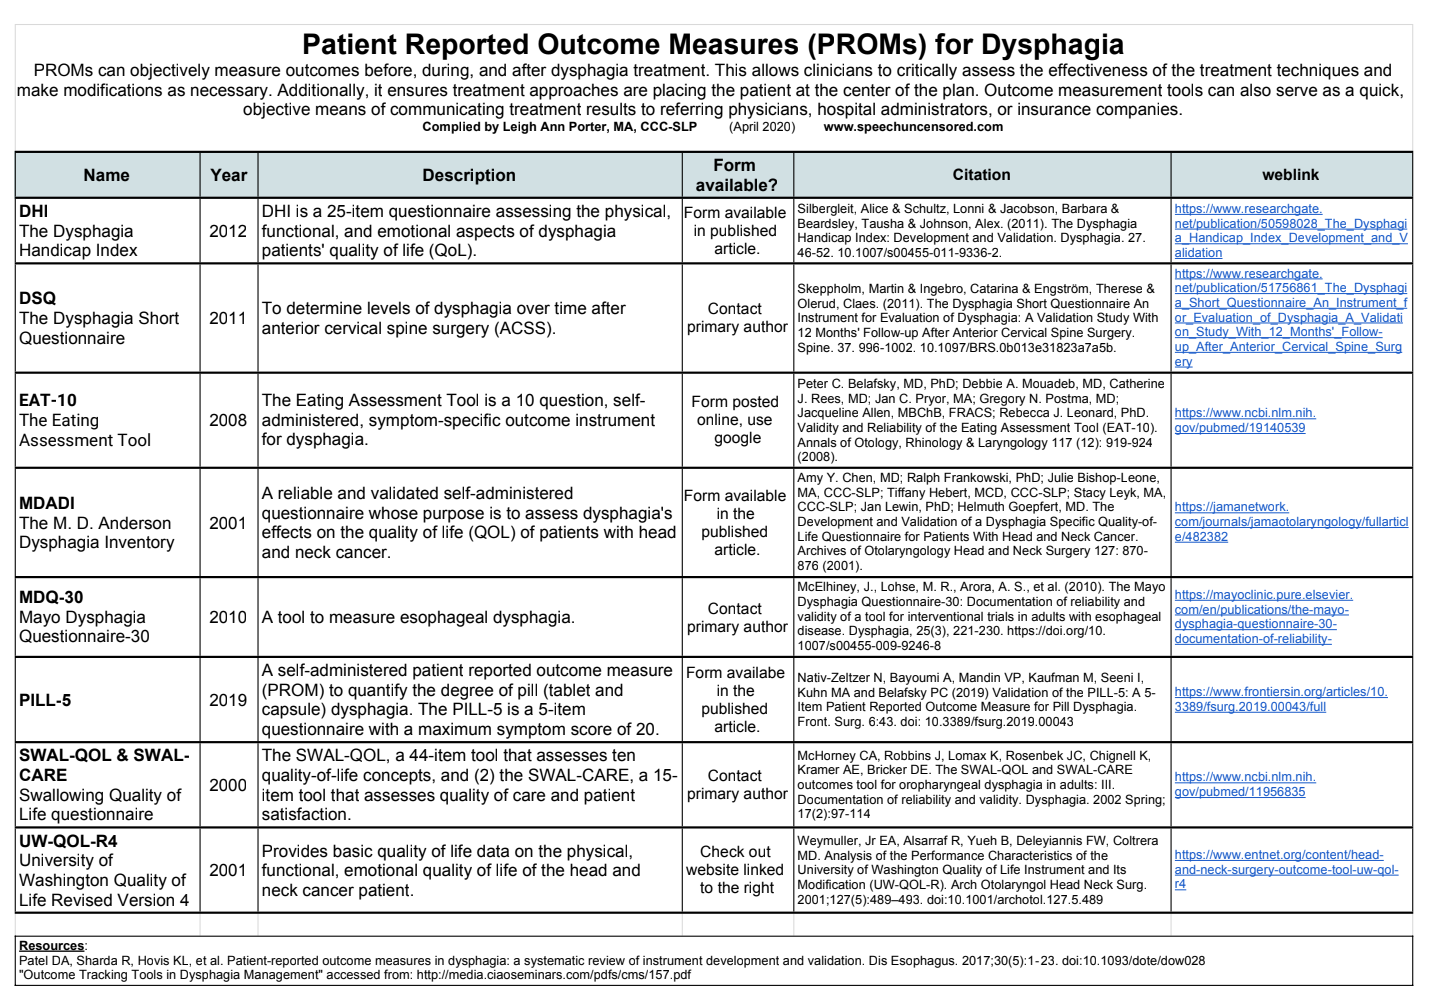 dysphagia-reporting-tools-speech-uncensored